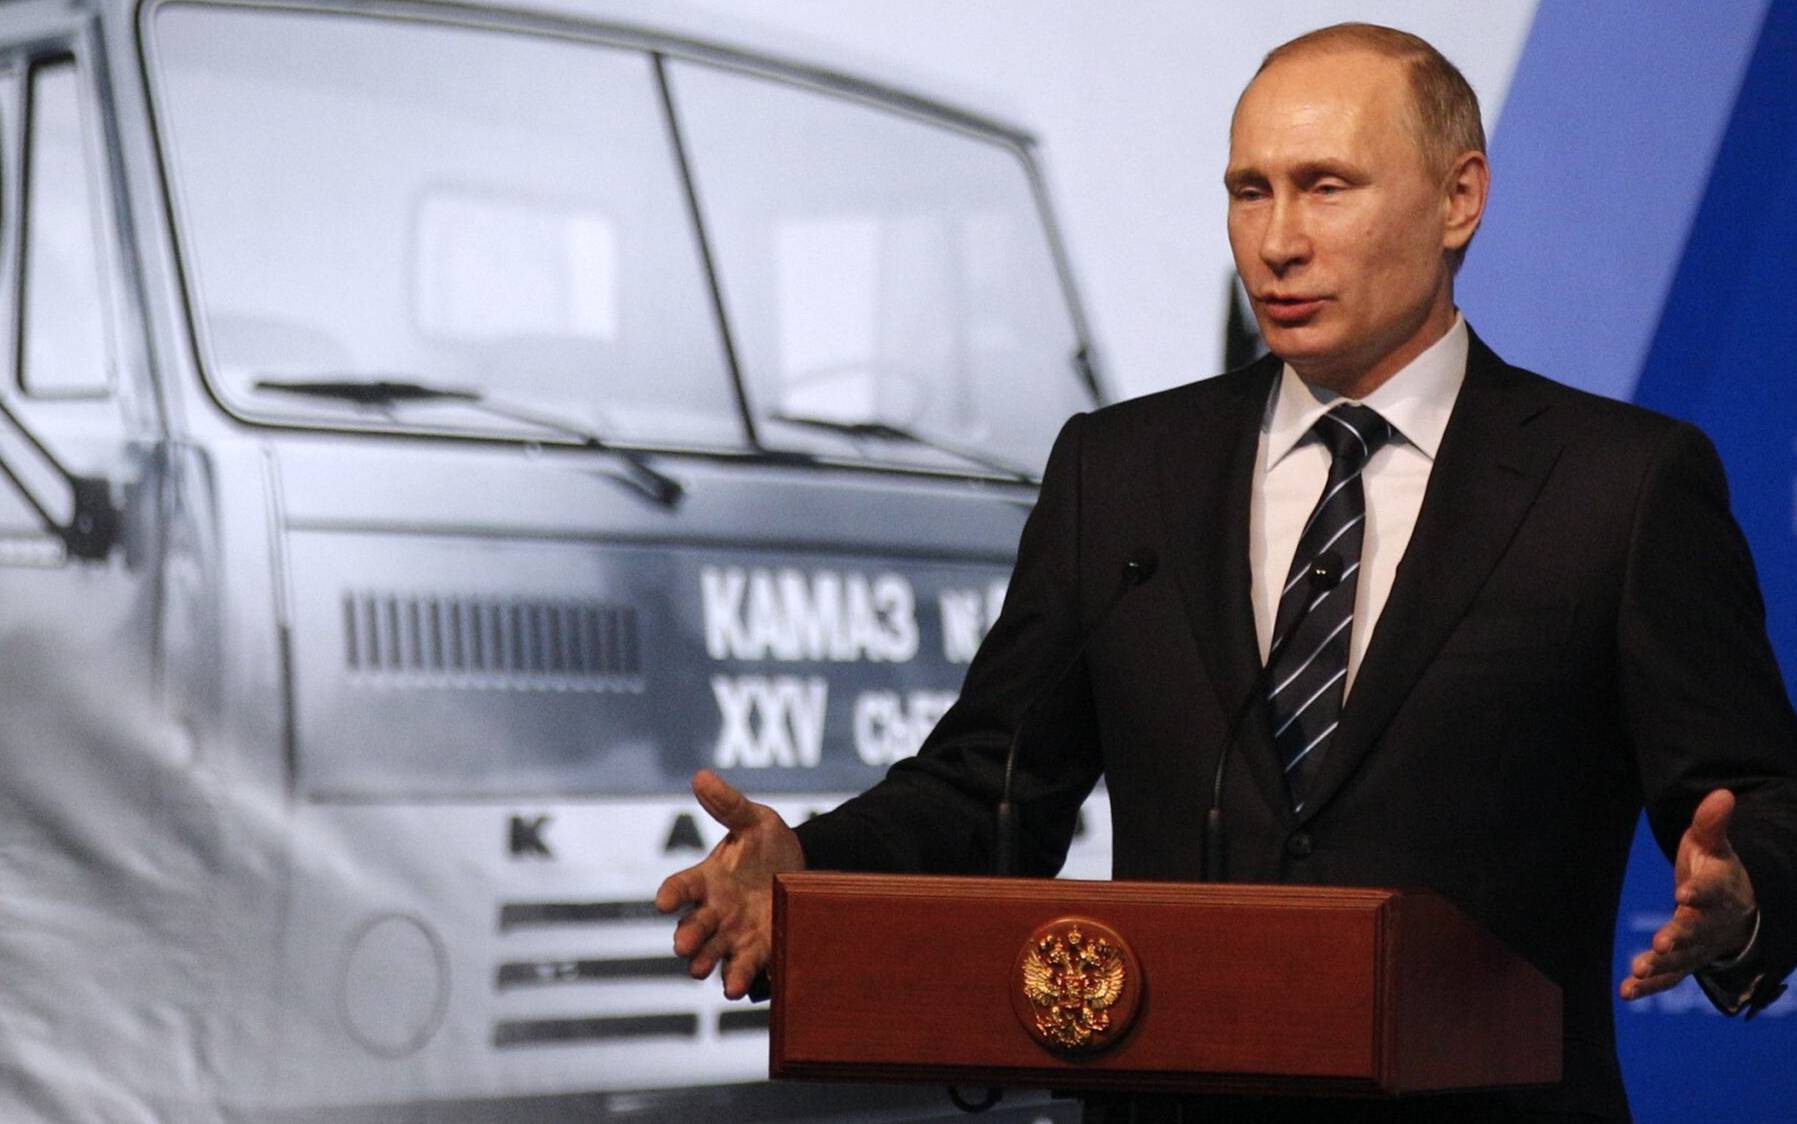 (FILES) This file photo taken on February 12, 2016 shows Russian President Vladimir Putin giving a speech at a ceremony marking 40 years since the launch of the production of KAMAZ trucks at the KamAZ vehicle plant in Naberezhnye Chelny, in the Russian region of Tatarstan, about 700 kilometers (450 miles) east of Moscow. - German heavy-goods vehicle group Daimler Truck said on February 28, 2022 it would cease its cooperation with the Russian lorry-maker Kamaz in light of Moscow's invasion of Ukraine. (Photo by ALEXANDER ZEMLIANICHENKO / POOL / AFP)